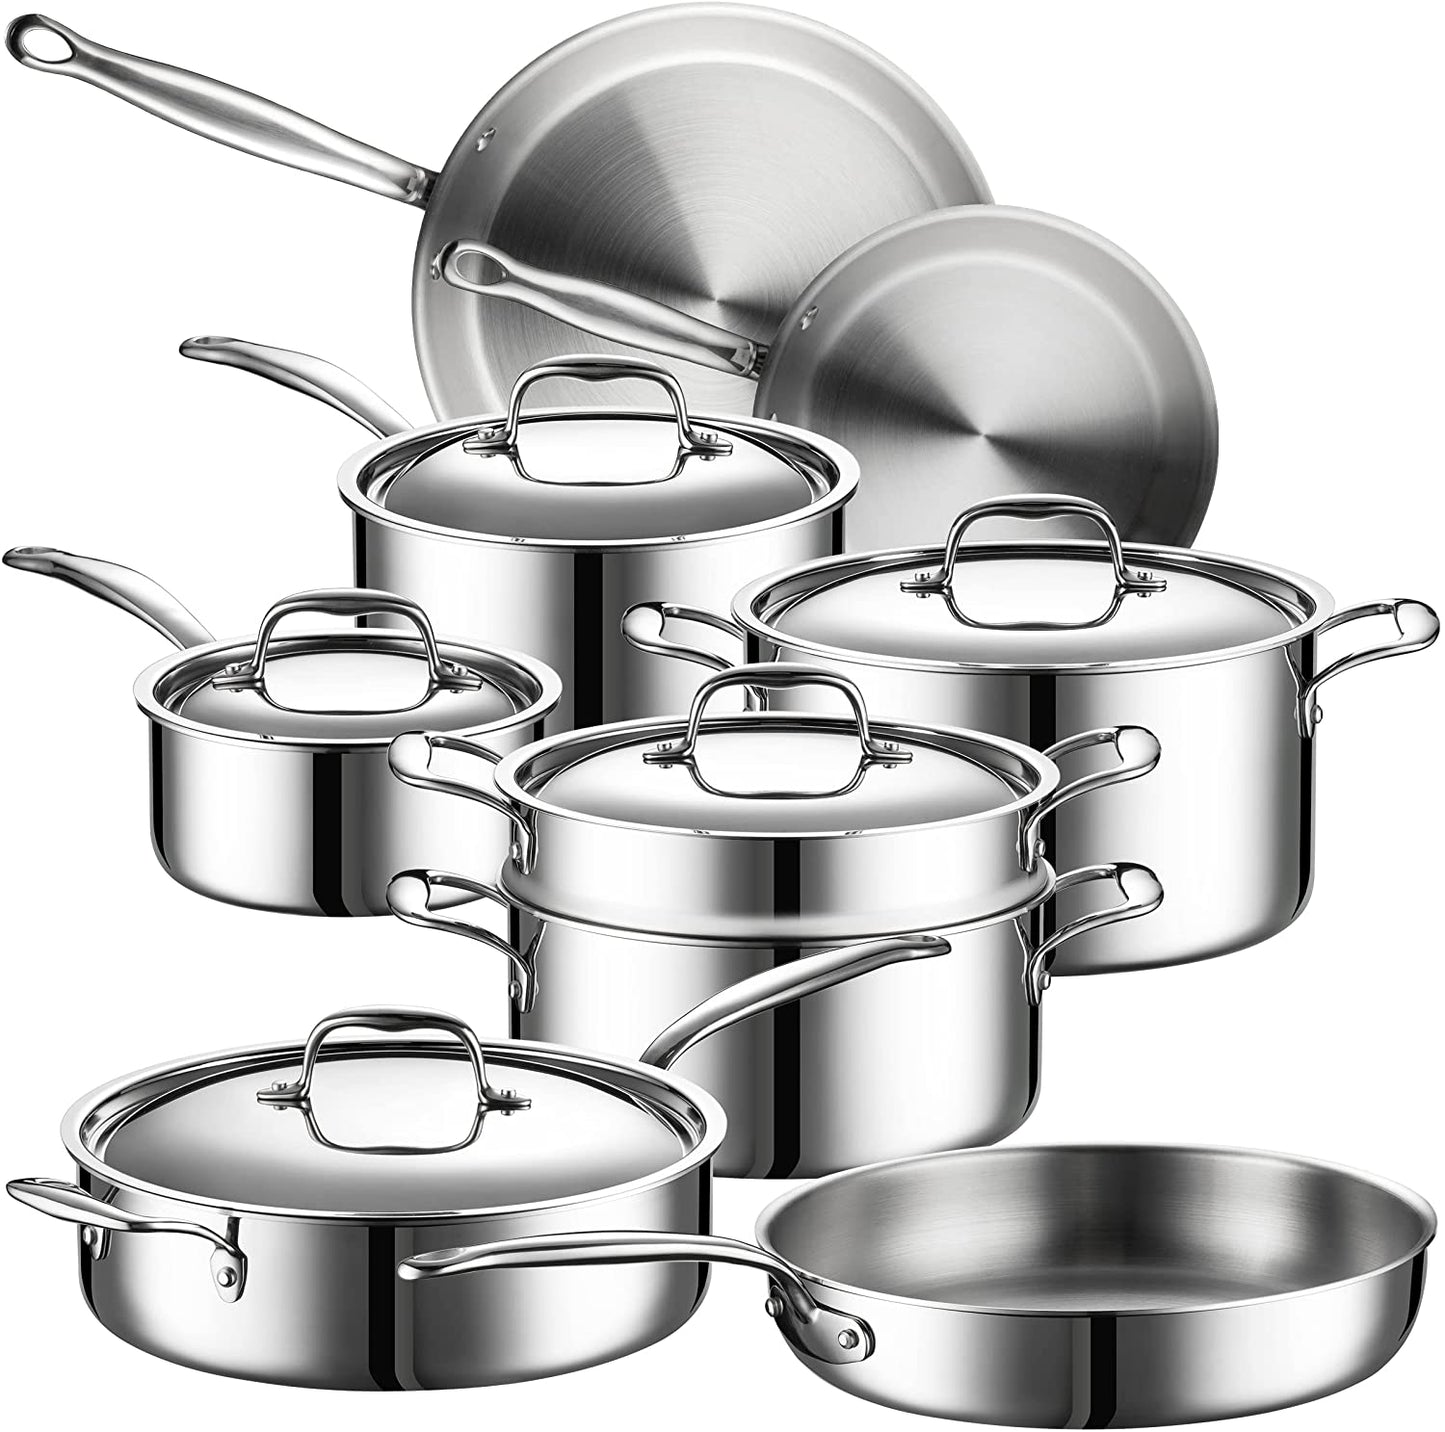 Cooks Standard Stainless Steel Kitchen Cookware Sets 10-Piece, Multi-P